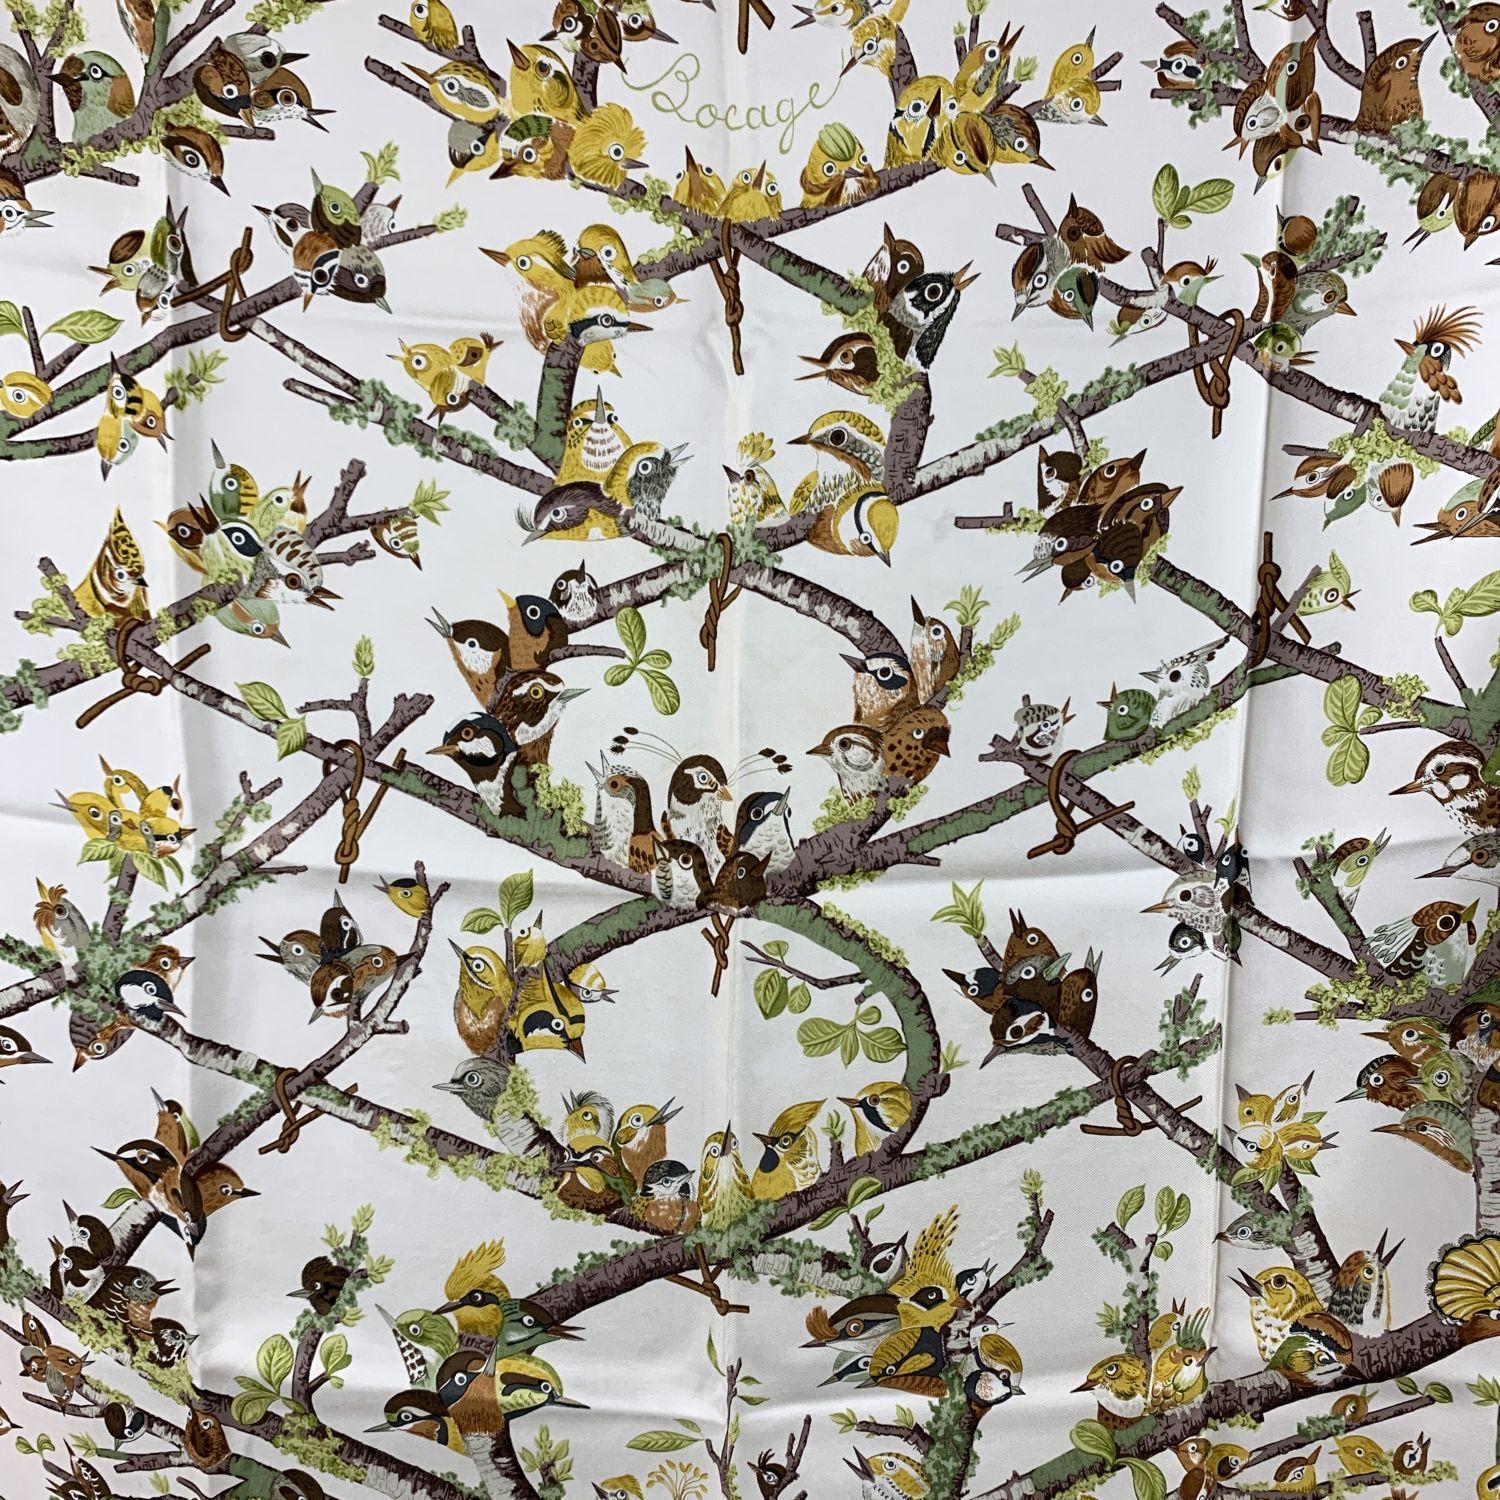 Rare HERMES Silk scarf named 'Bocage', created by artist Anne Gavarni, and first issued in 1971. It depicts a set of small birds framed in a light brown/beige border. Main colors are beige, white, green and brown. 100% Silk. Hand rolled edges.